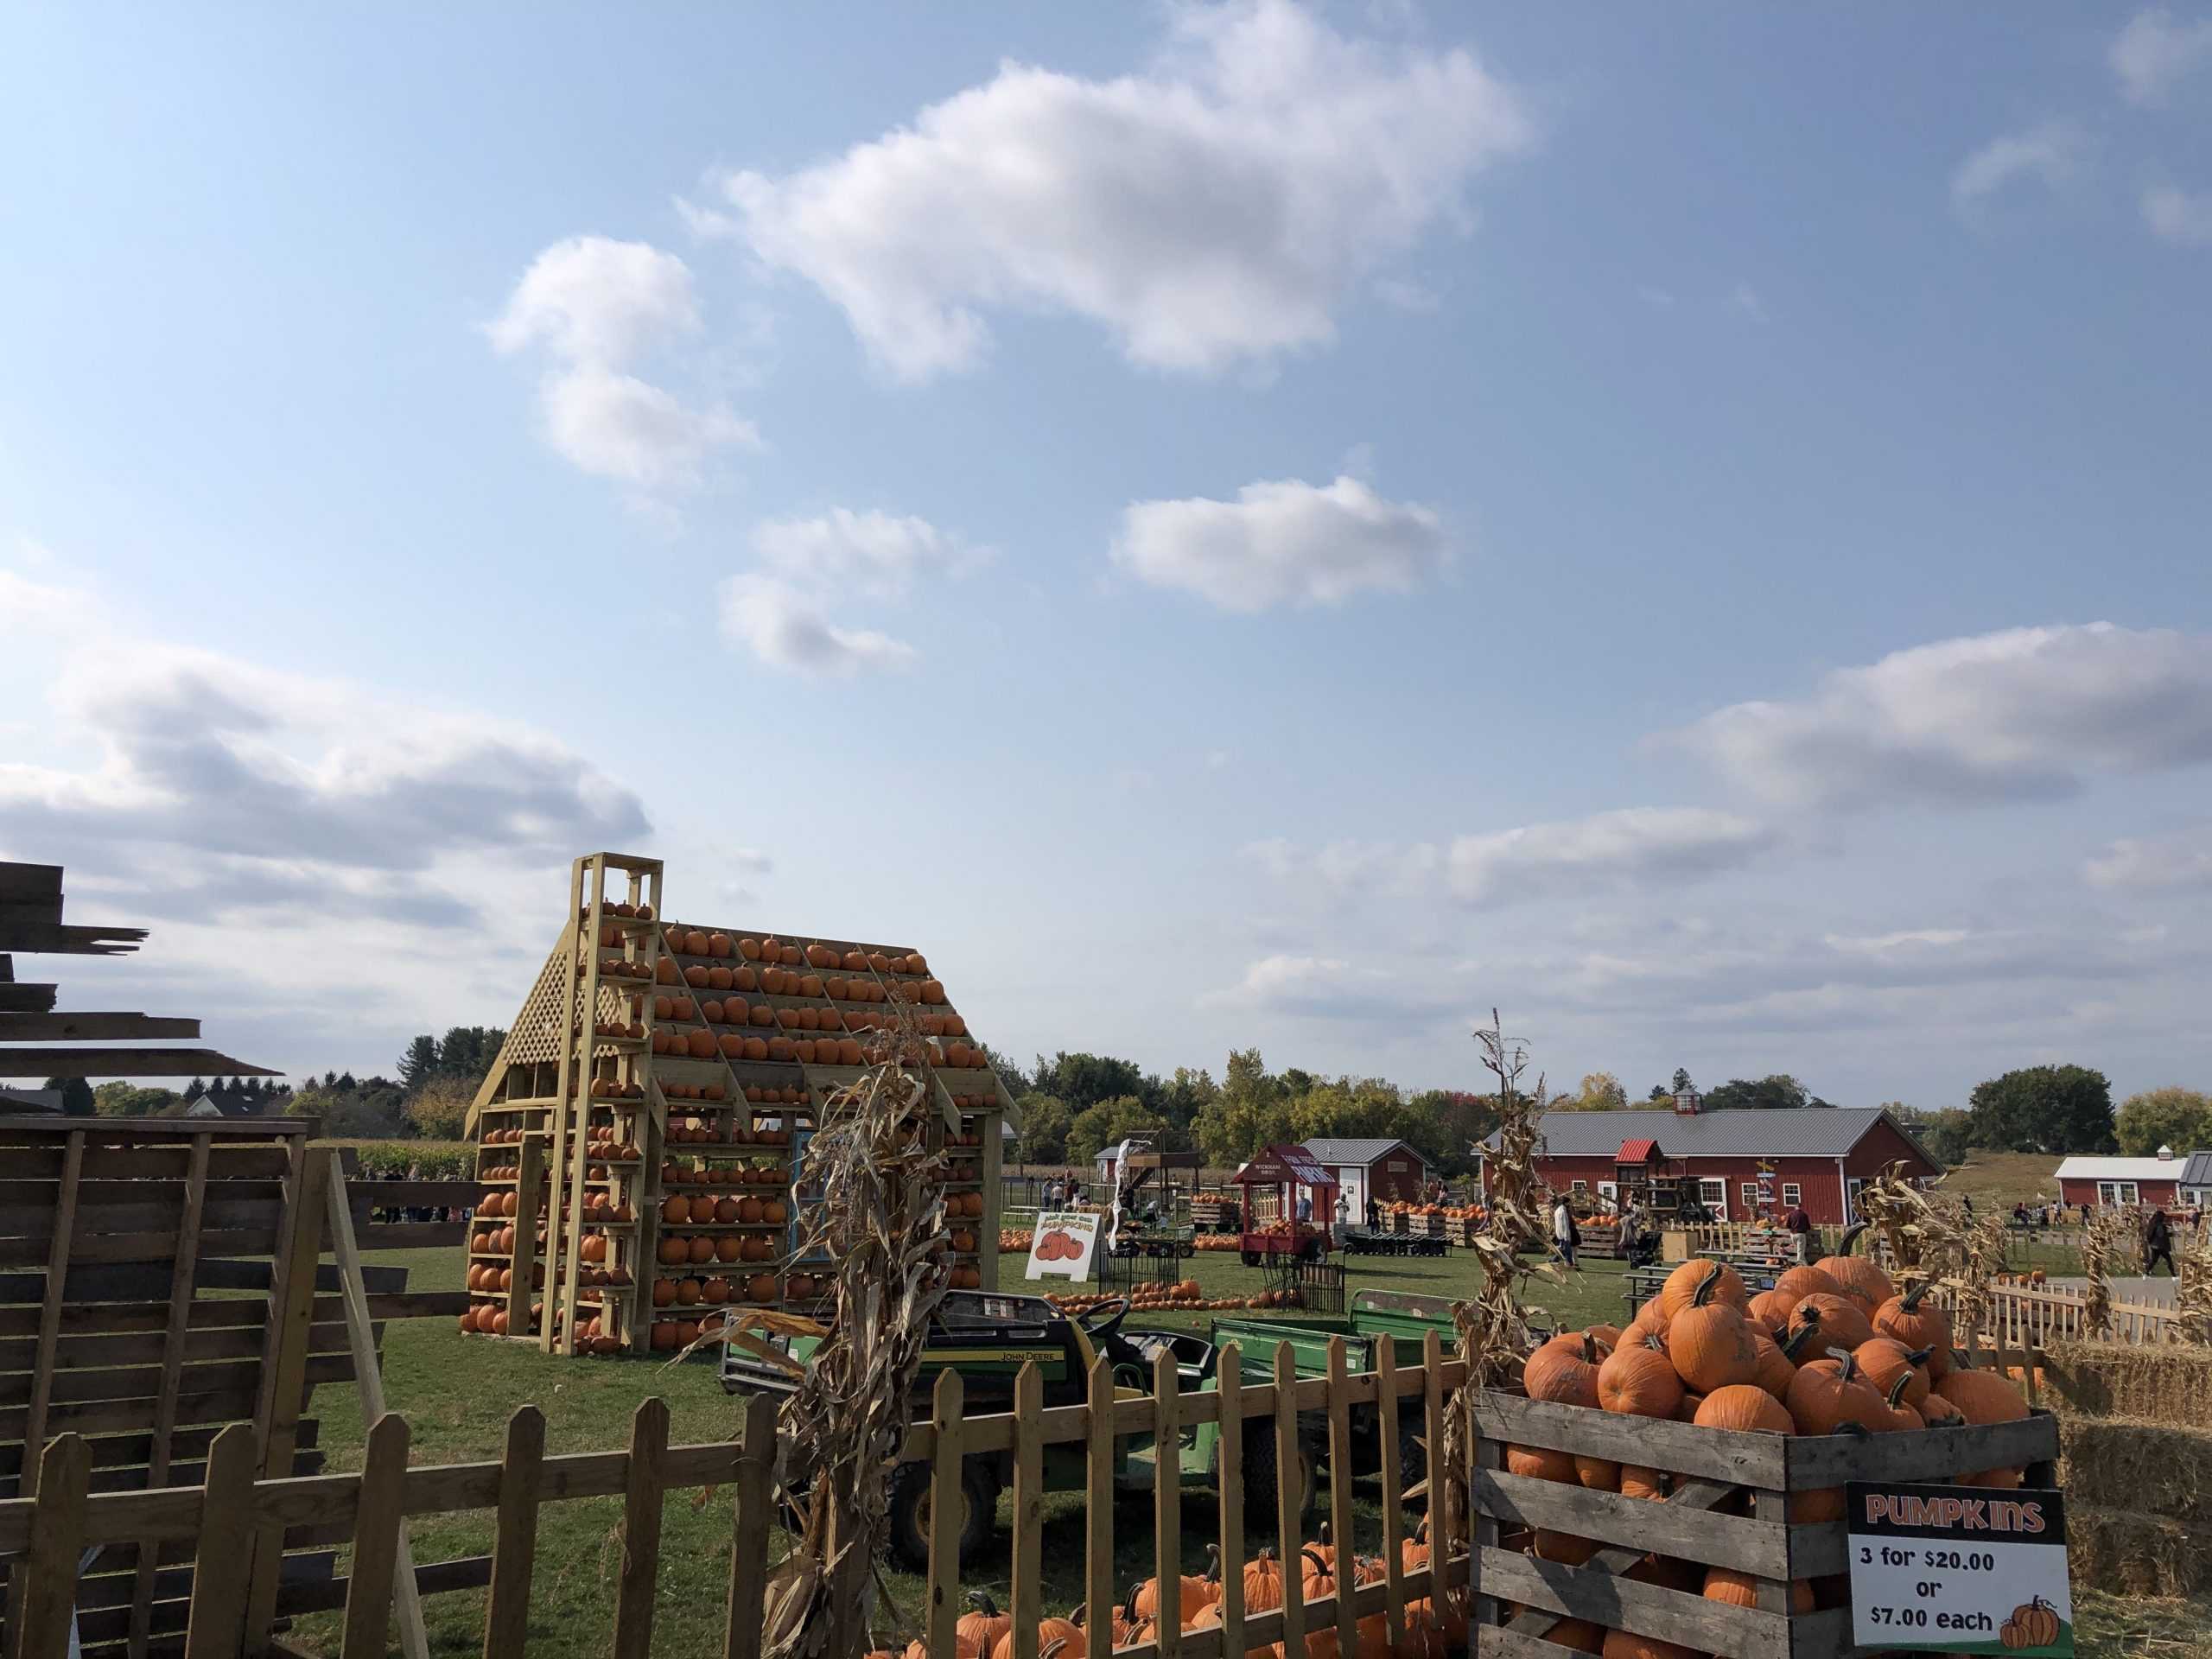 Apple+Cider%2C+Pumpkin+Patches%2C+Fall+Foliage+and+More%3A+How+to+Enjoy+the+Fall+Season+in+Rochester